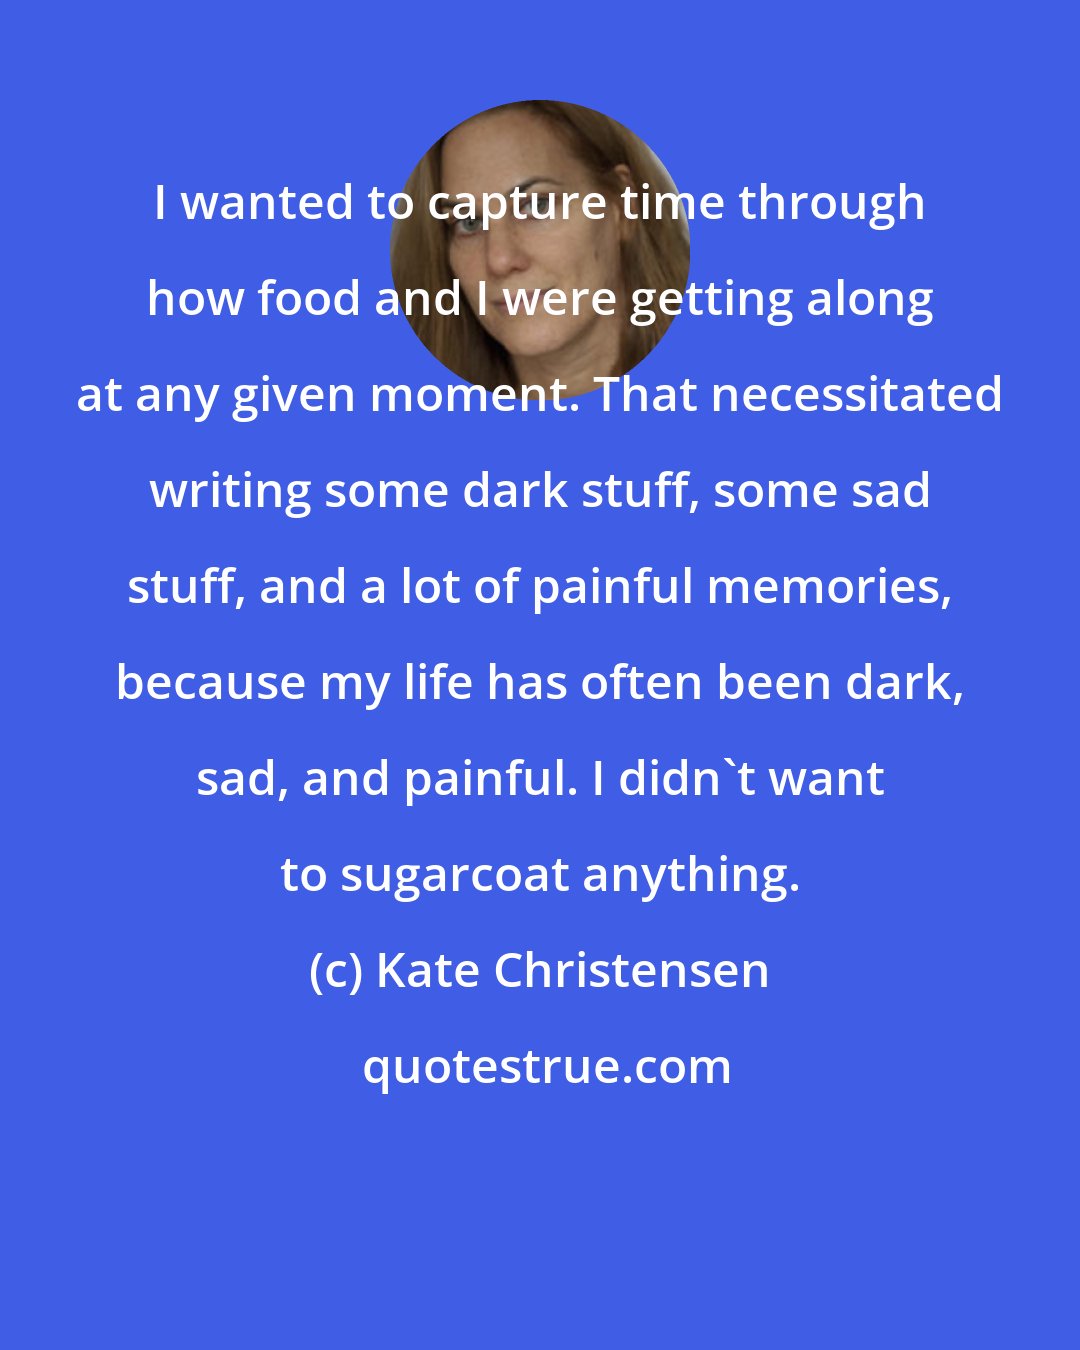 Kate Christensen: I wanted to capture time through how food and I were getting along at any given moment. That necessitated writing some dark stuff, some sad stuff, and a lot of painful memories, because my life has often been dark, sad, and painful. I didn't want to sugarcoat anything.